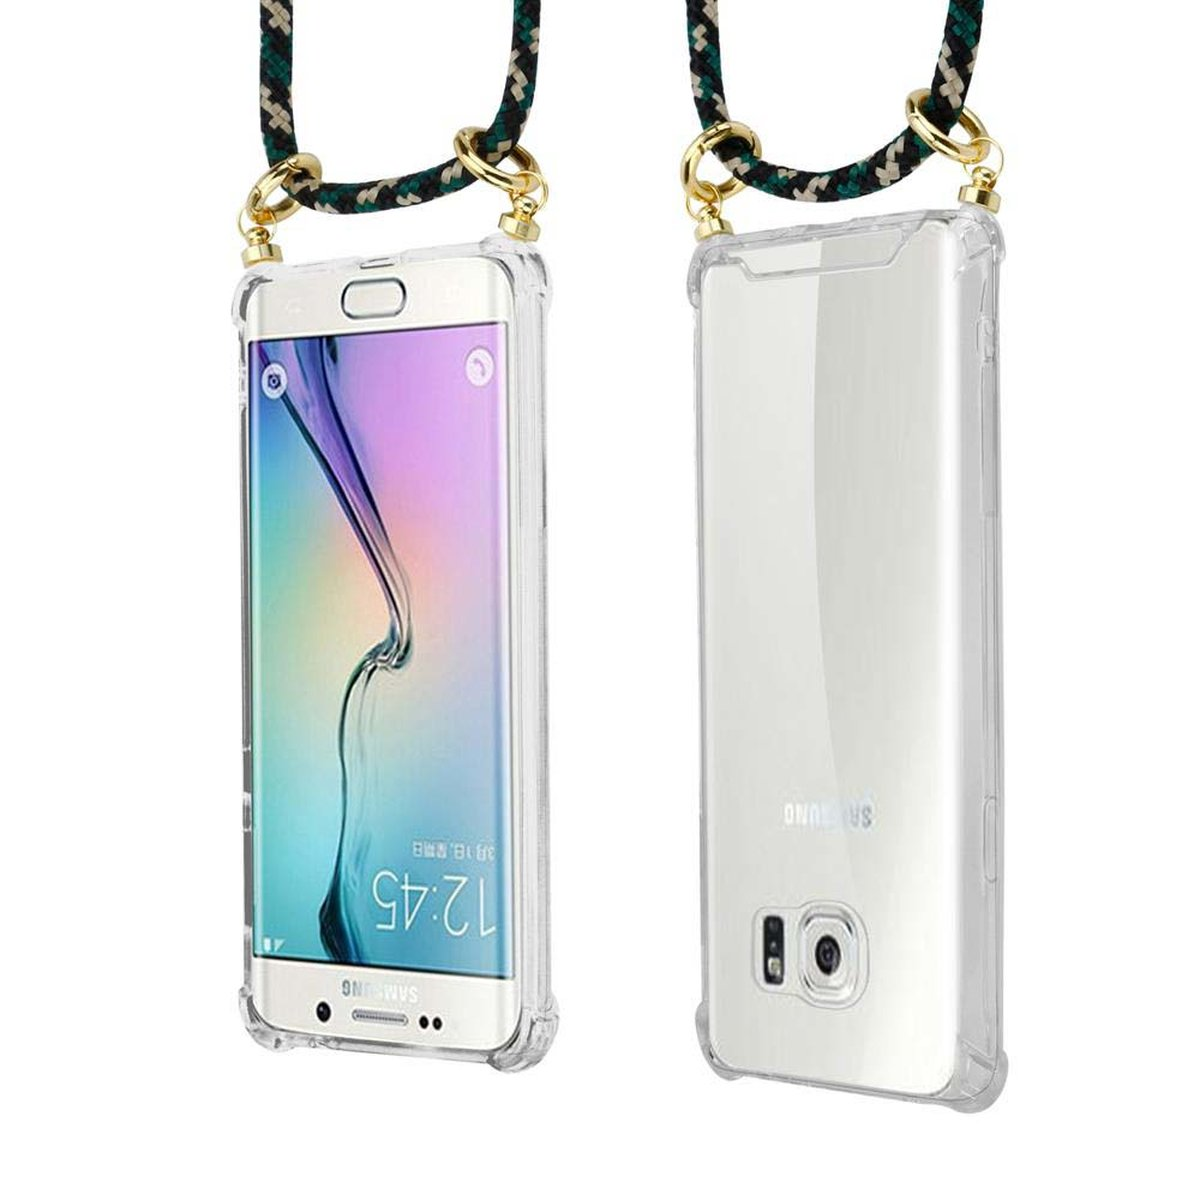 S6, Samsung, Galaxy CAMOUFLAGE Ringen, Gold abnehmbarer Band Backcover, Handy Kette Kordel Hülle, CADORABO und mit